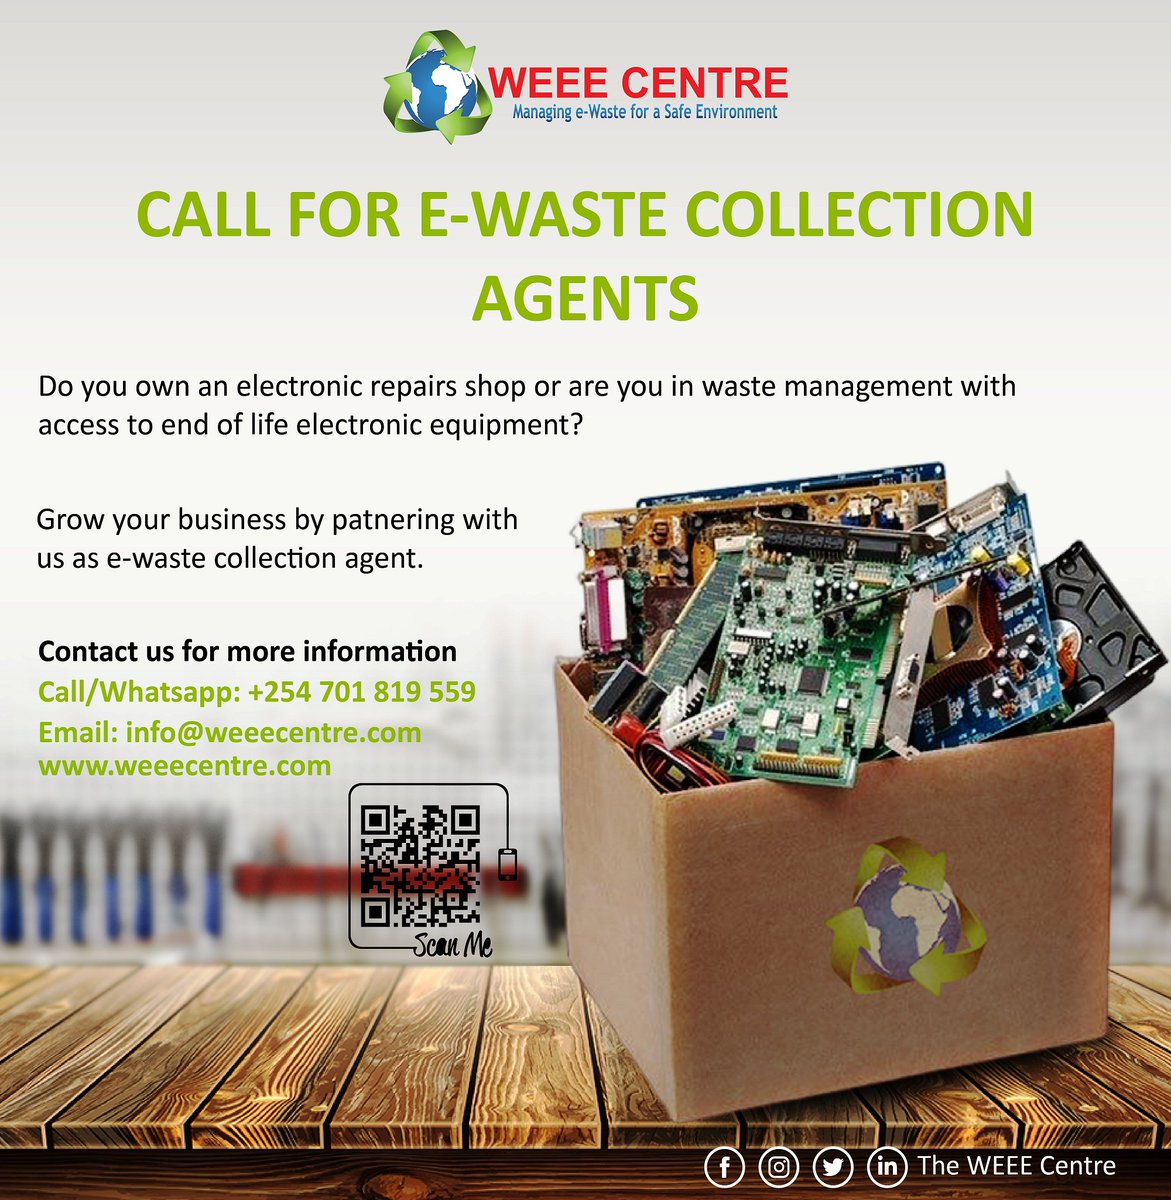 Join the green revolution! Be a part of the solution and become a Waste Collection Agent at the WEEE Center. Apply now and make a positive impact on the environment! #kithurekindiki #DeadMenSuing #UhurunikulipaUshuru